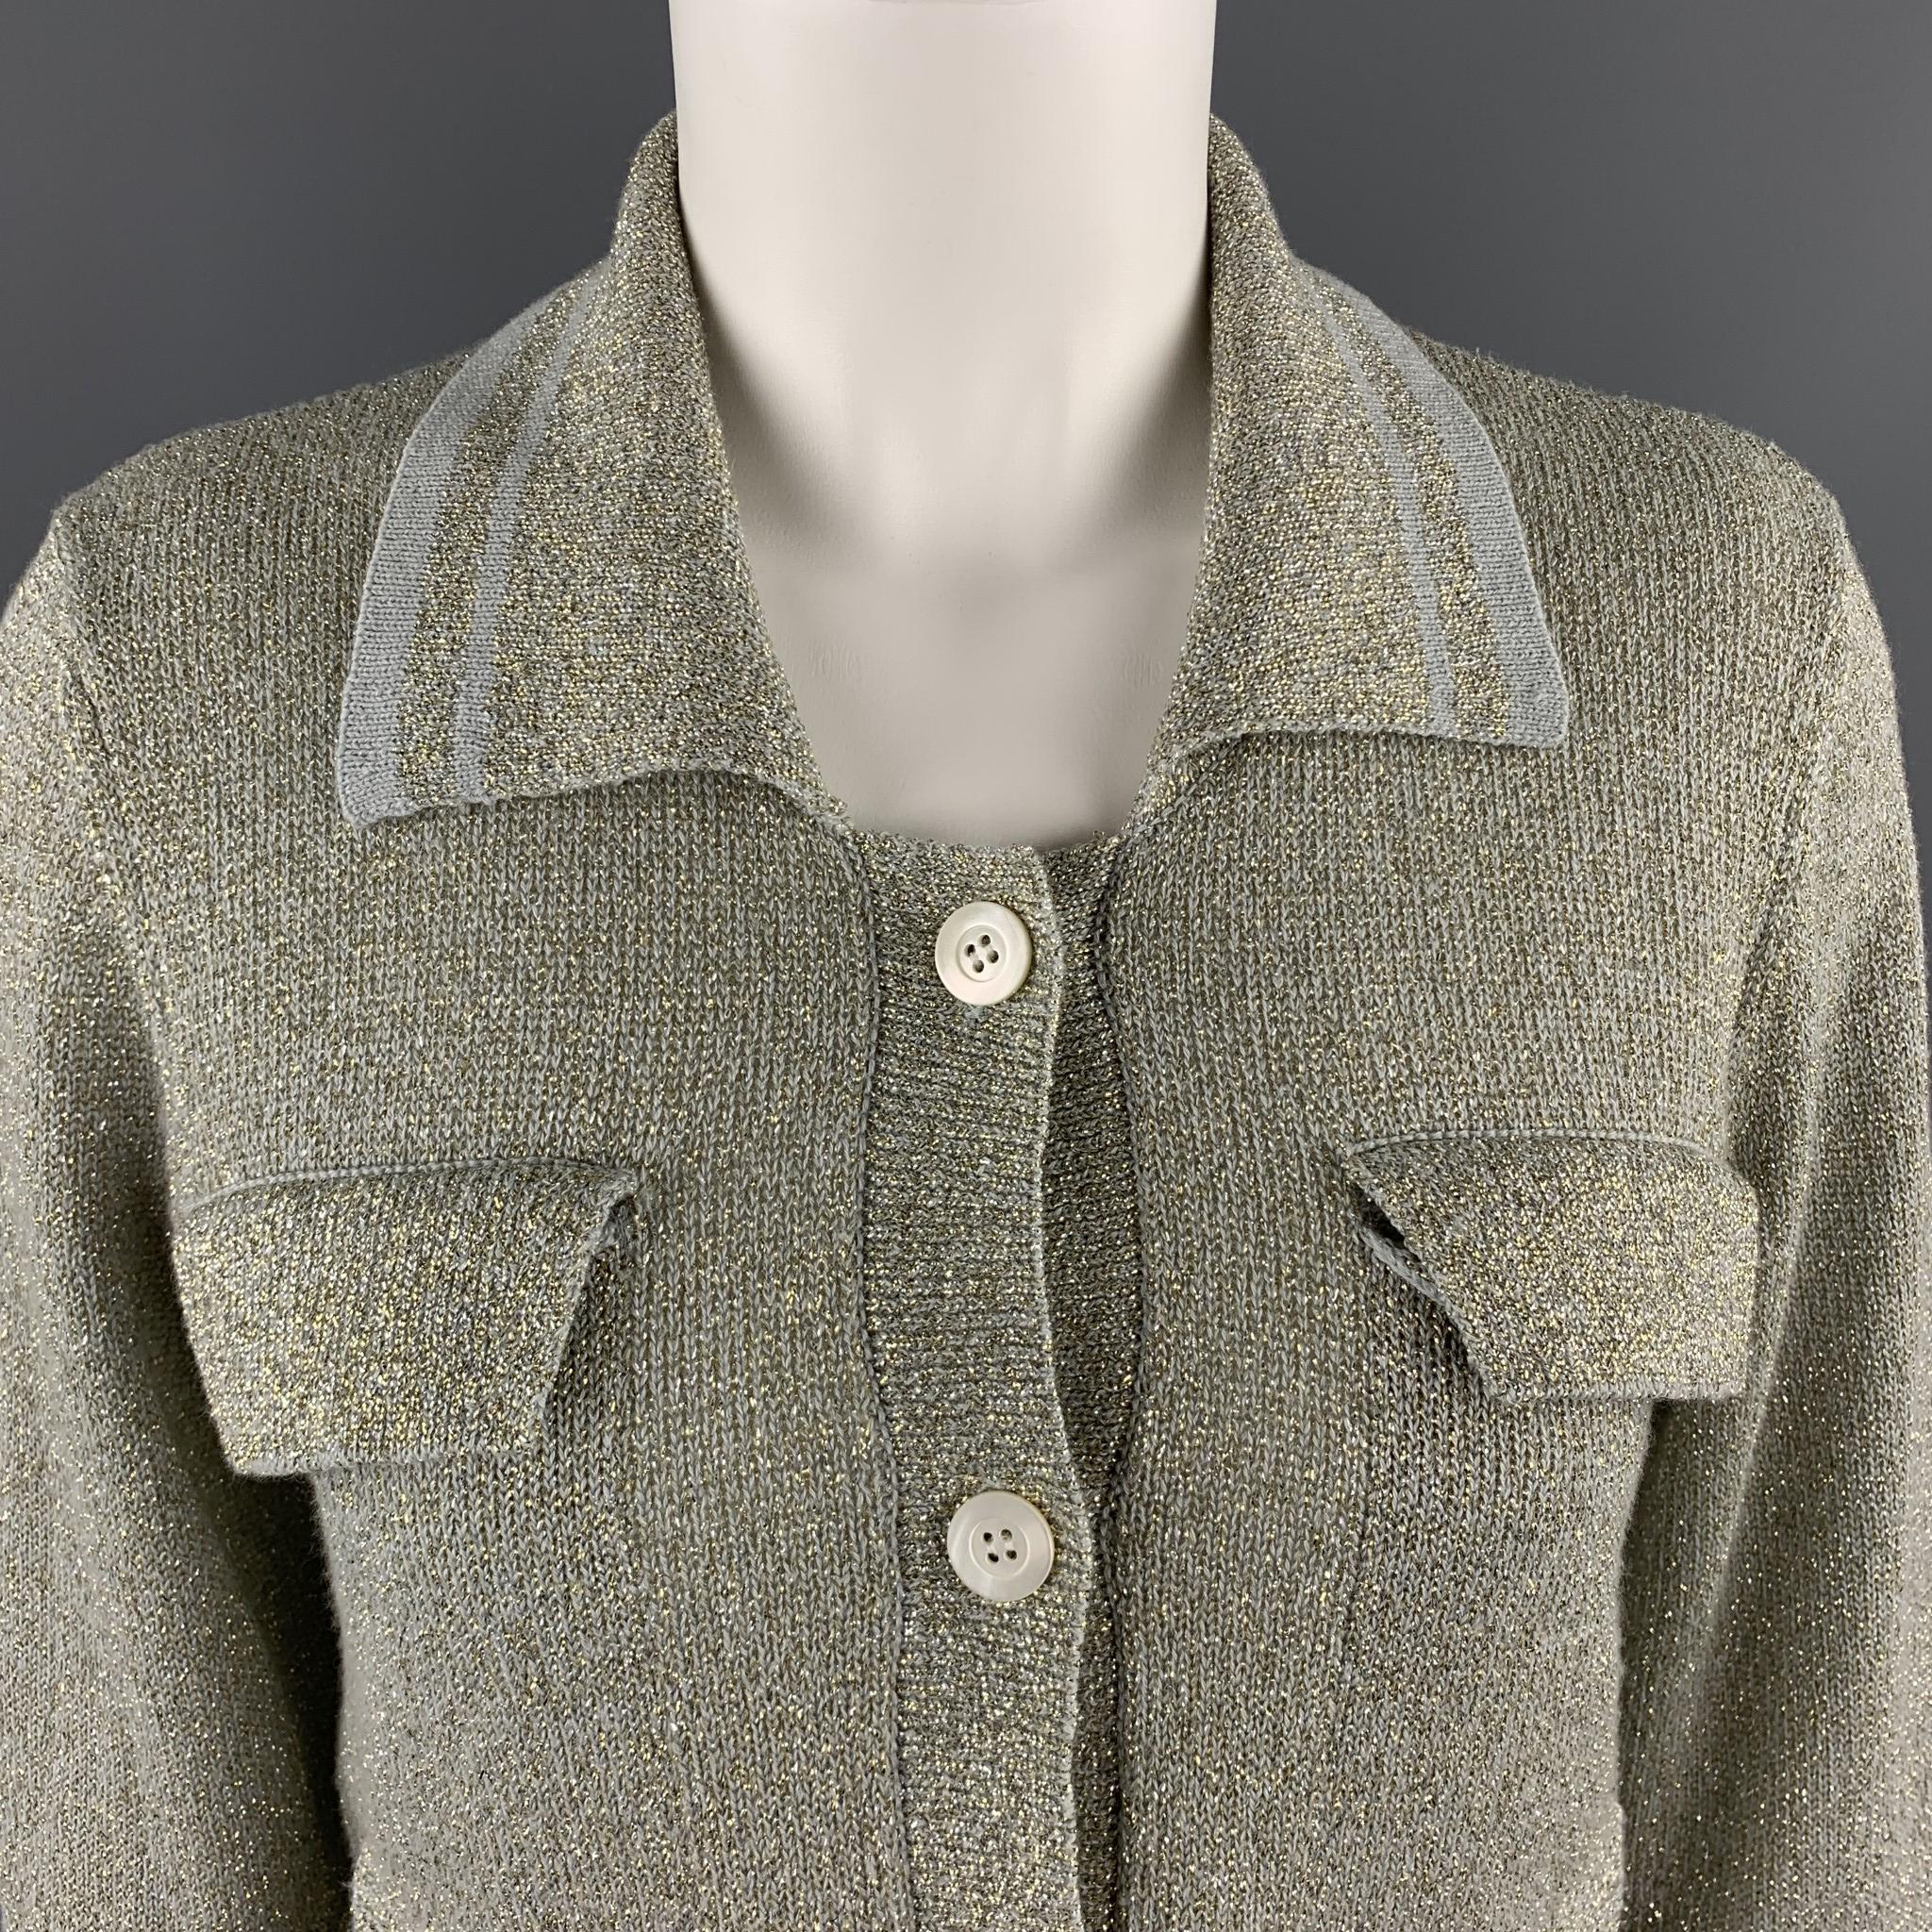 DRIES VAN NOTEN cardigan comes in silver and gold metallic sparkle knit with a striped collar, button front, and flap cheat pockets.  Made in Belgium.

Excellent Pre-Owned Condition.
Marked: Medium

Measurements:

Shoulder: 15 in.
Bust: 34